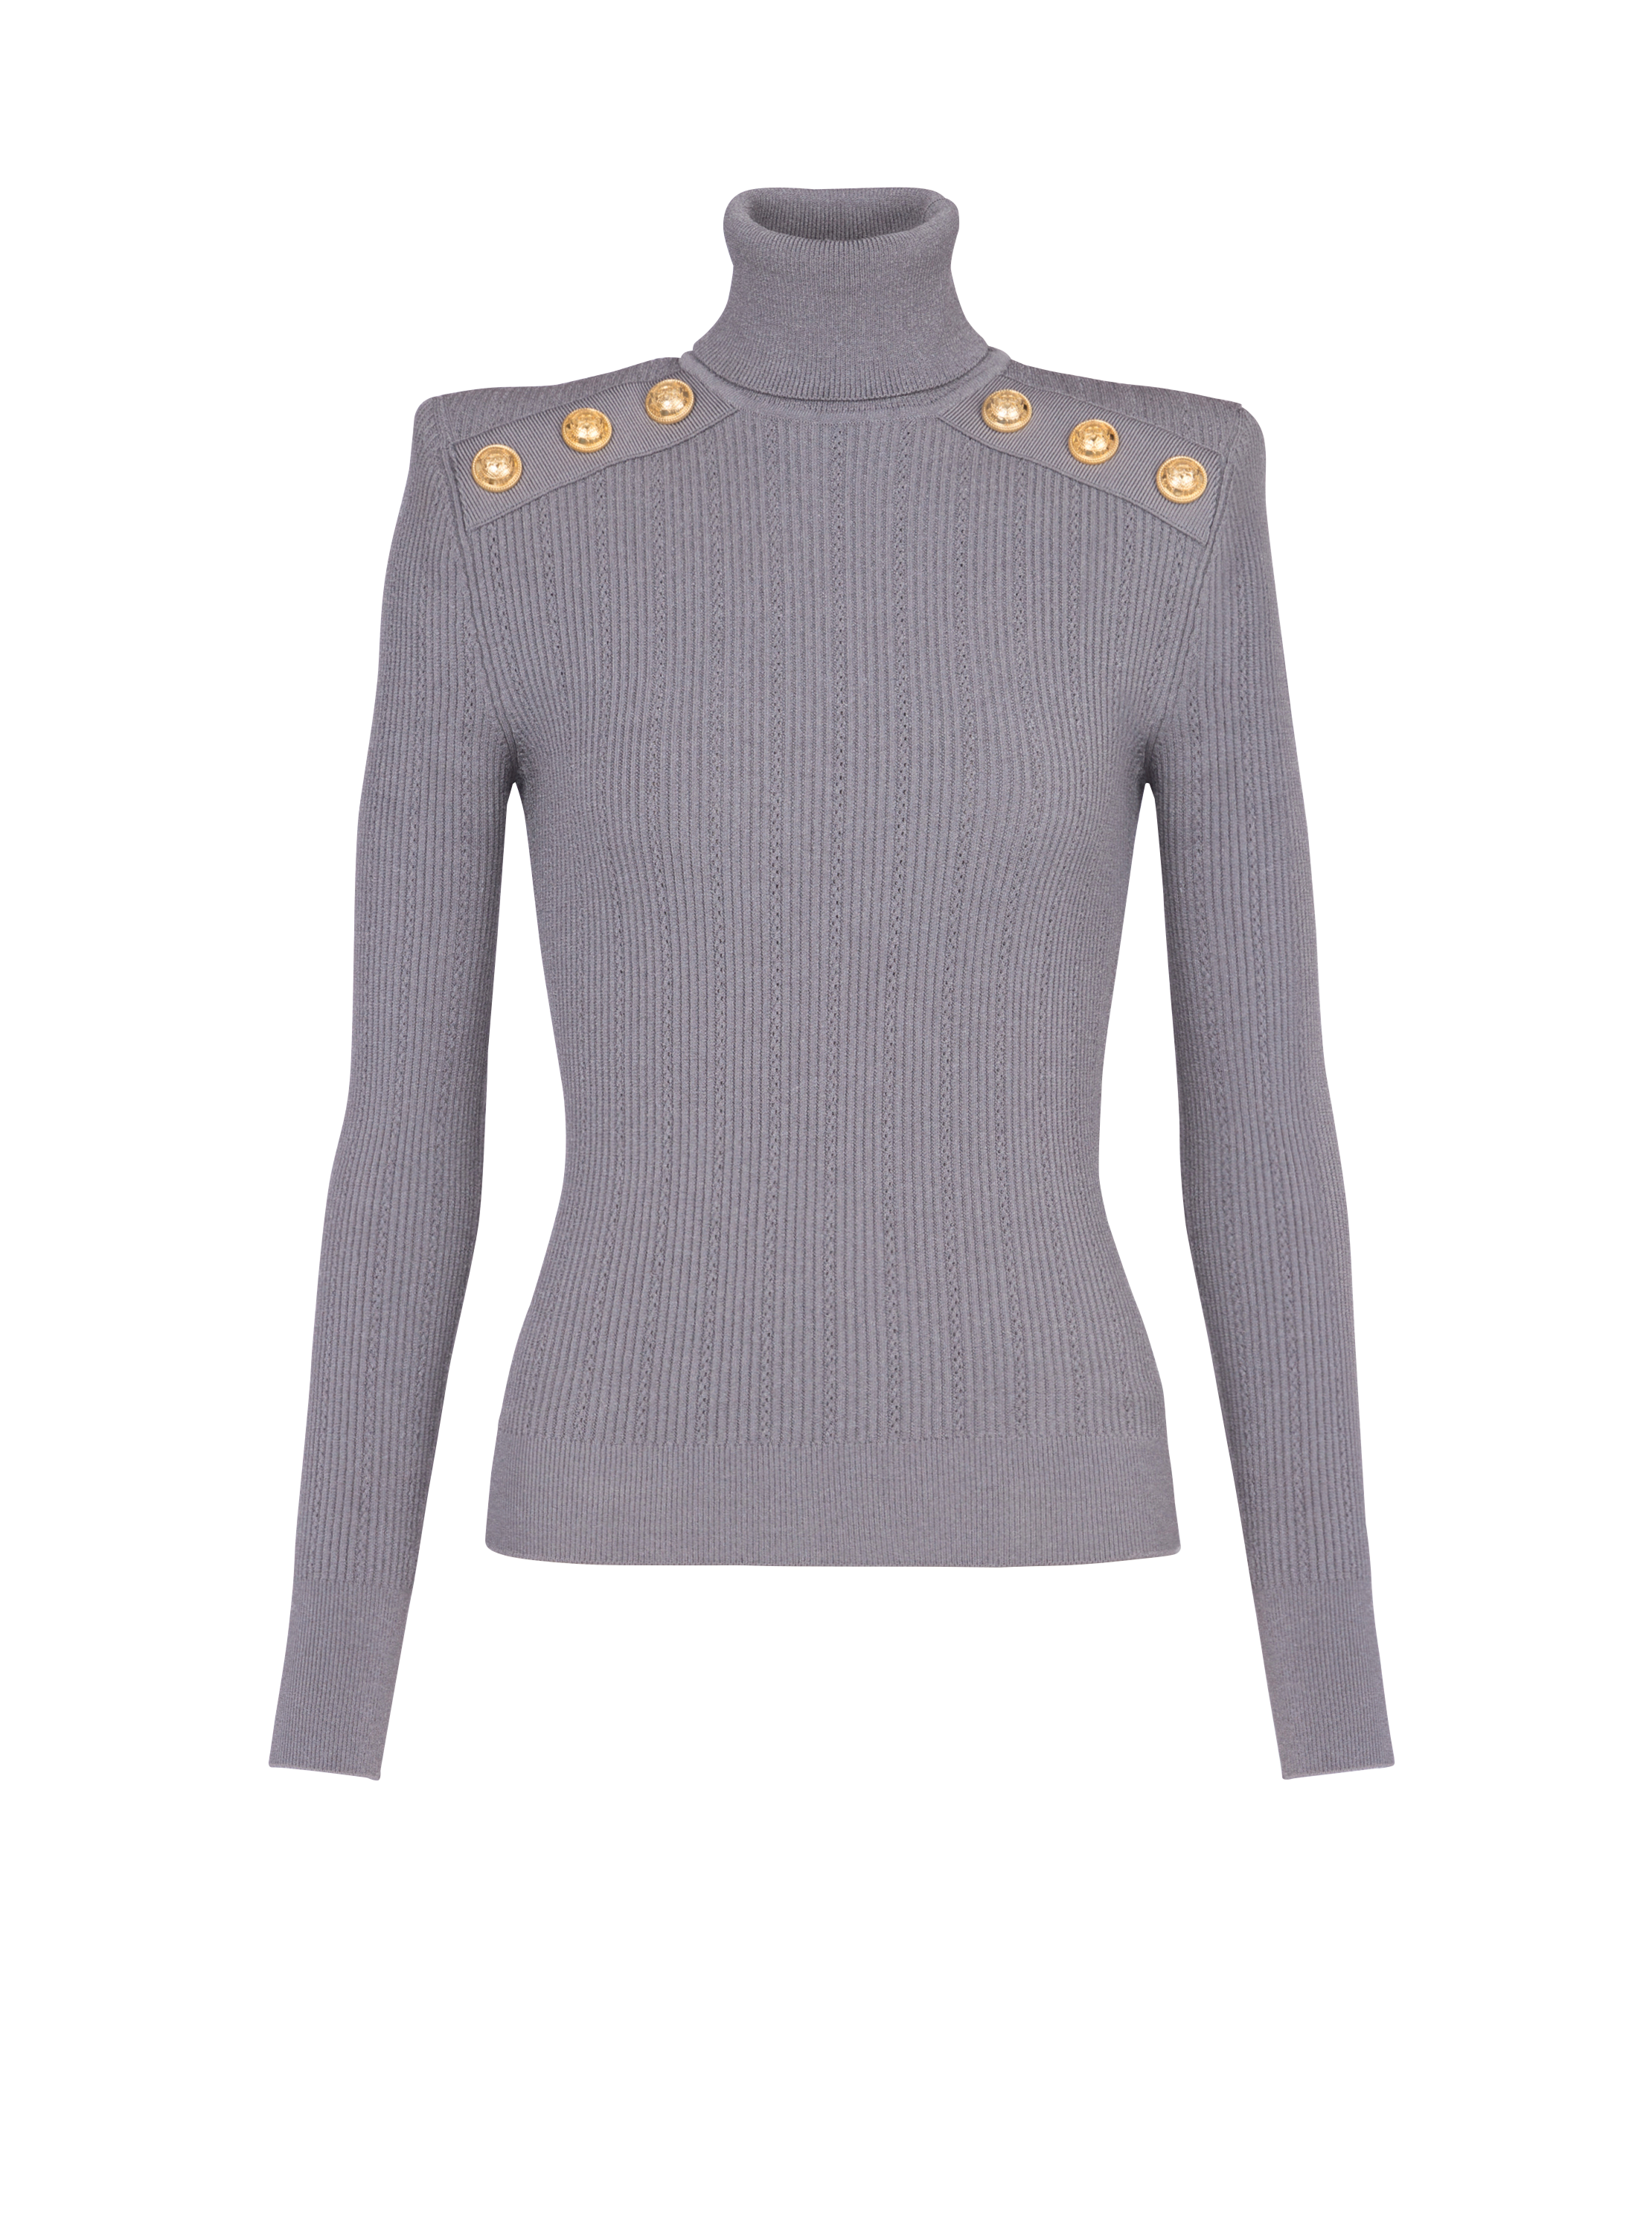 Knit jumper with gold buttons, grey, hi-res